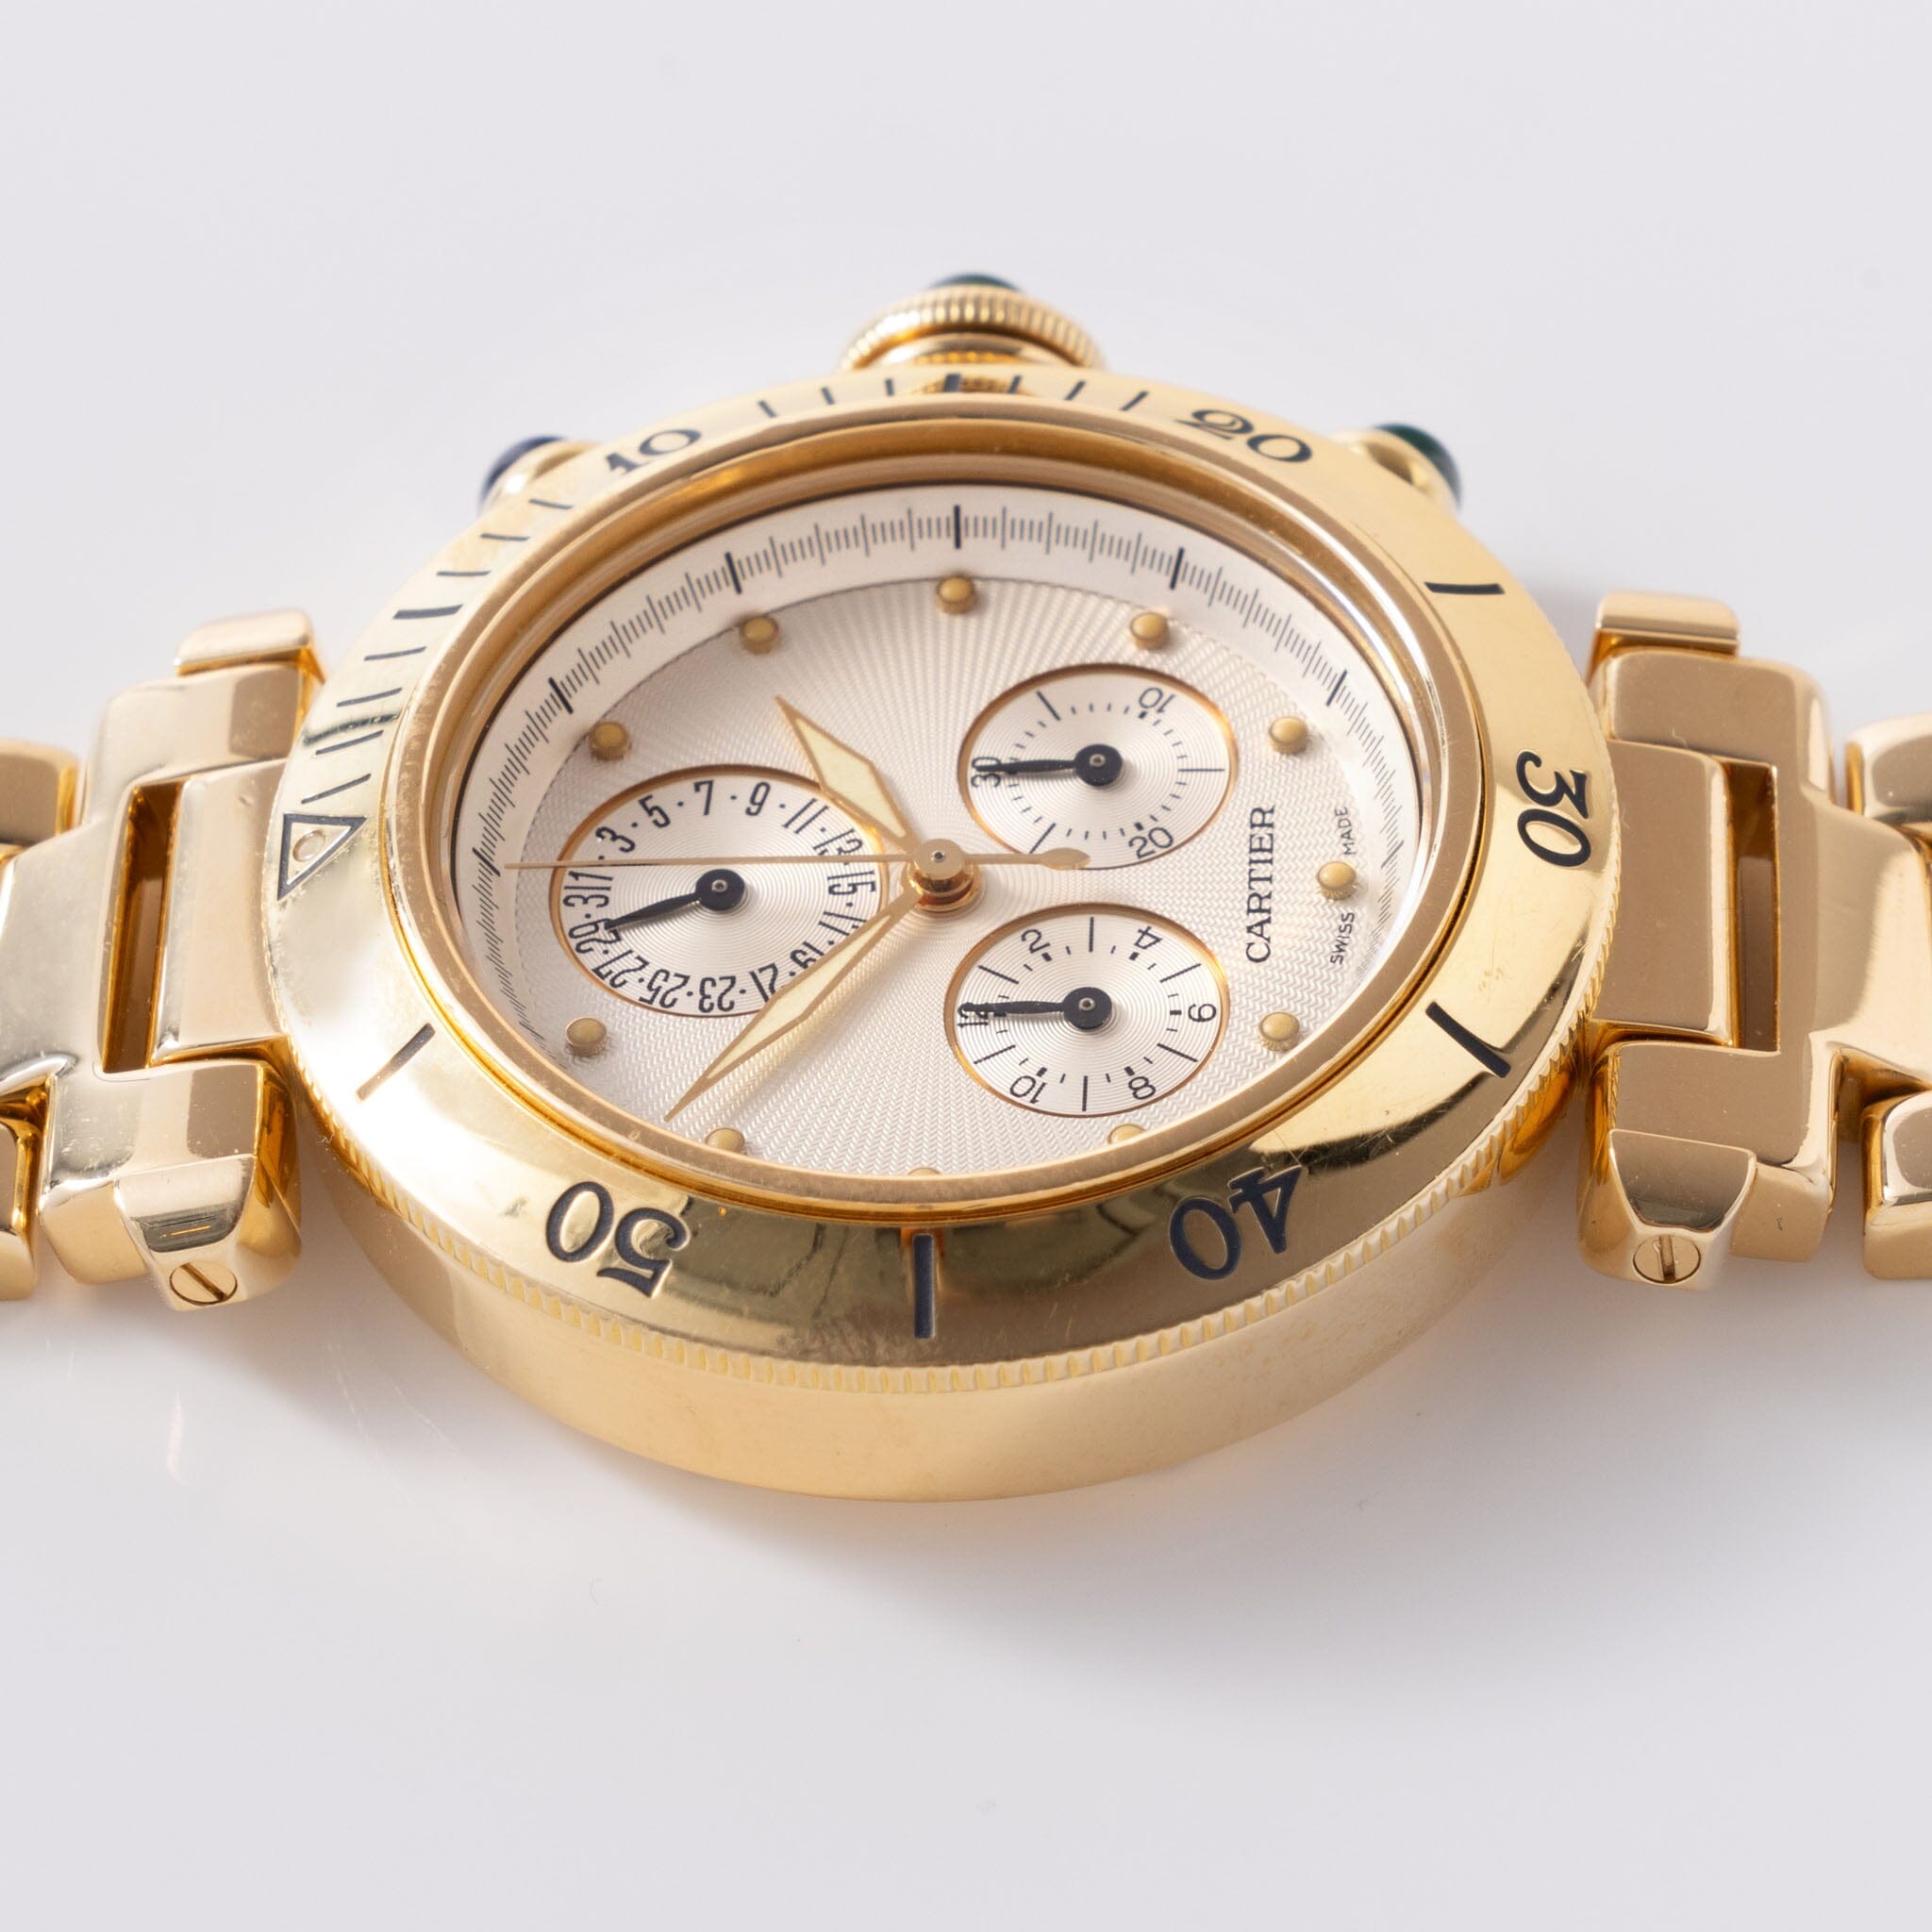 Cartier Pasha Chronograph in 18kt Gold Box and Service Invoice ref 1353 1